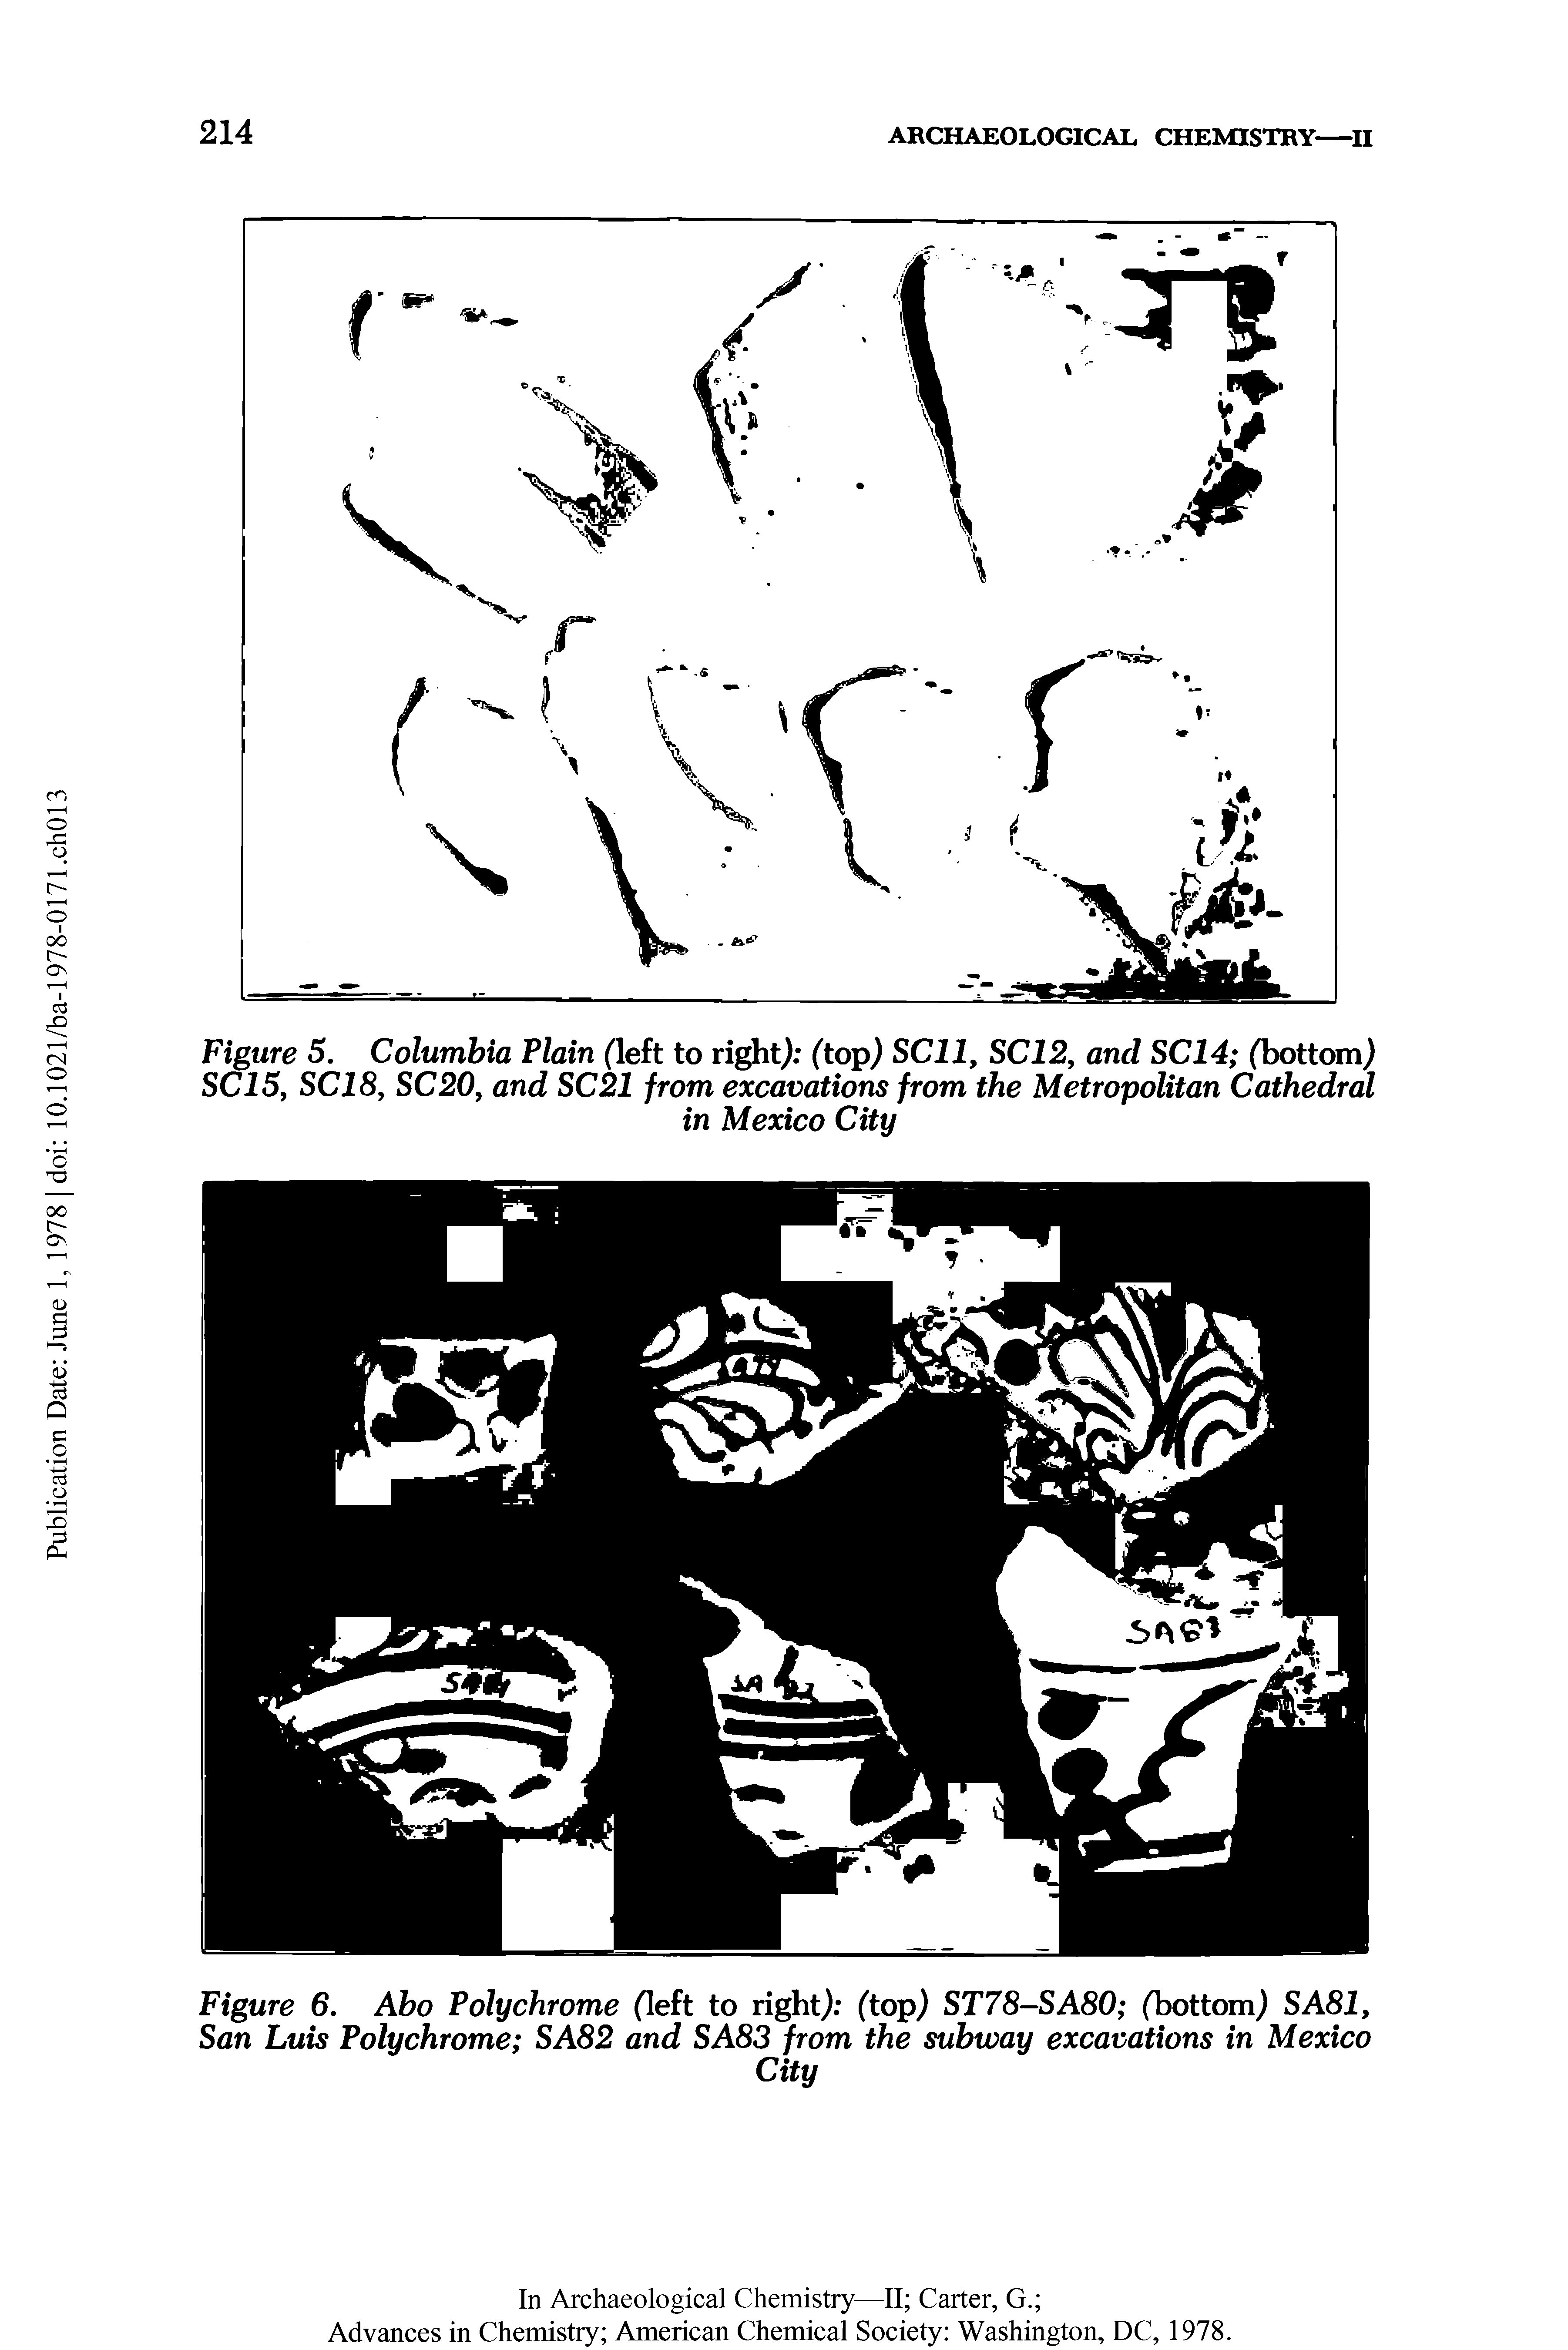 Figure 5. Columbia Plain (left to right) (top) SCll, SCJ2, and SC14 (bottom) SC 15, SC 18, SC20, and SC21 from excavations from the Metropolitan Cathedral...